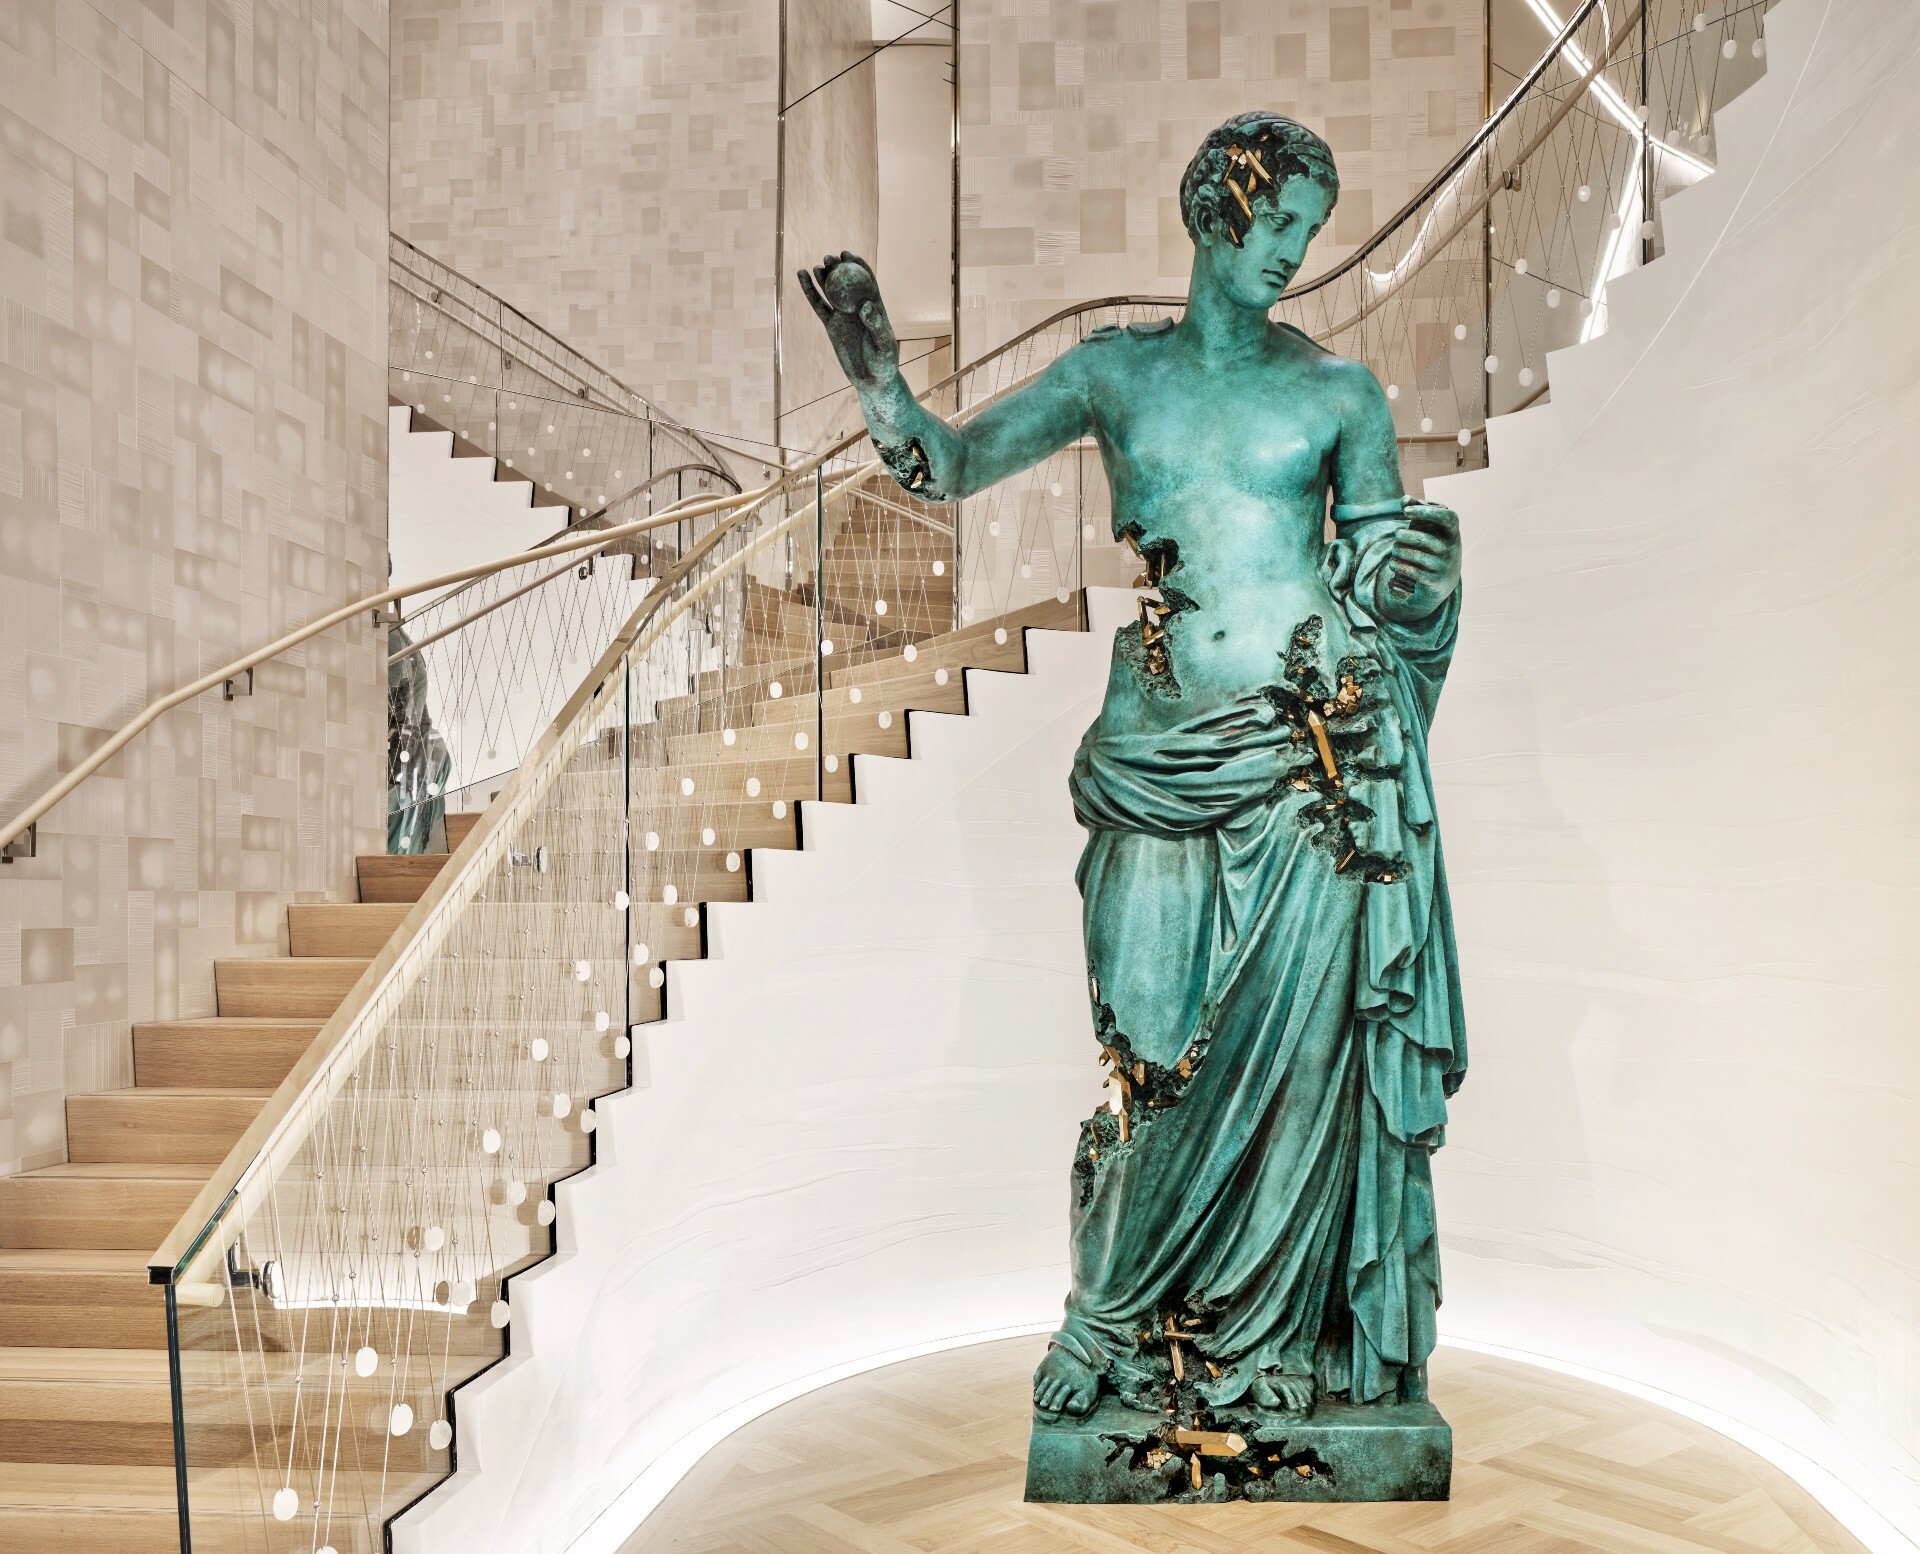 Tiffany Unwraps New Era With Revamped Fifth Avenue Flagship